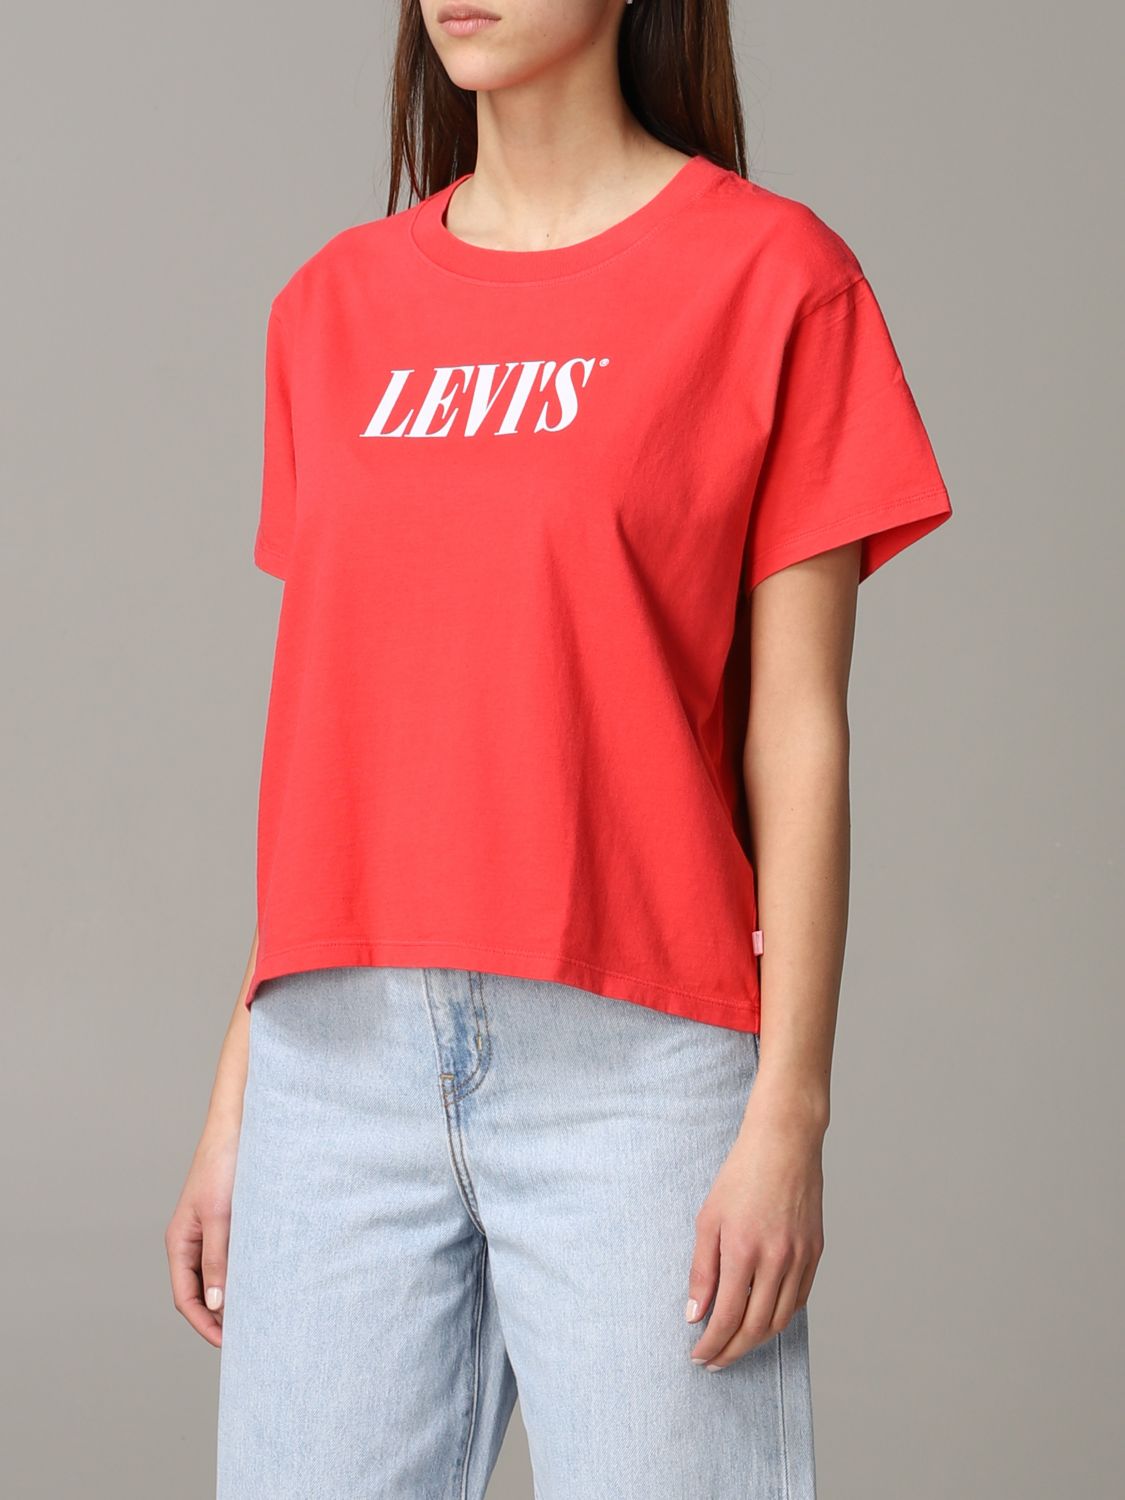 Levi's short-sleeved T-shirt with logo | T-Shirt Levi's Women Red | T ...